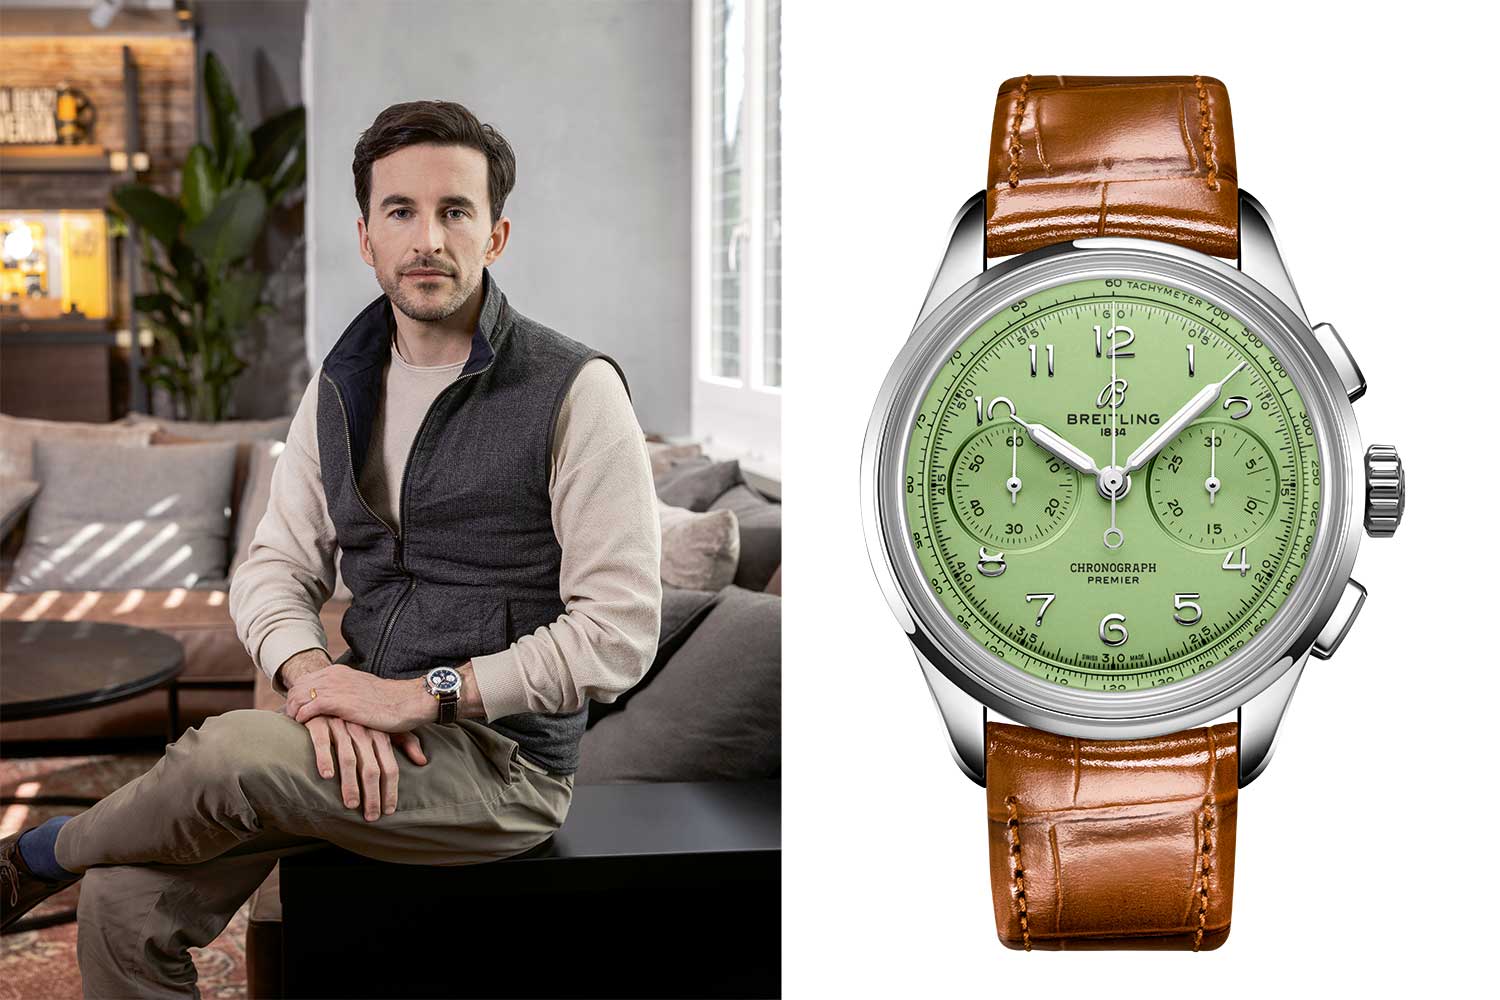 Breitling’s Creative Director, Sylvain Berneron; In 2021, the Brietling Premier B09 Chronograph 40 was released with a compelling pistachio dial